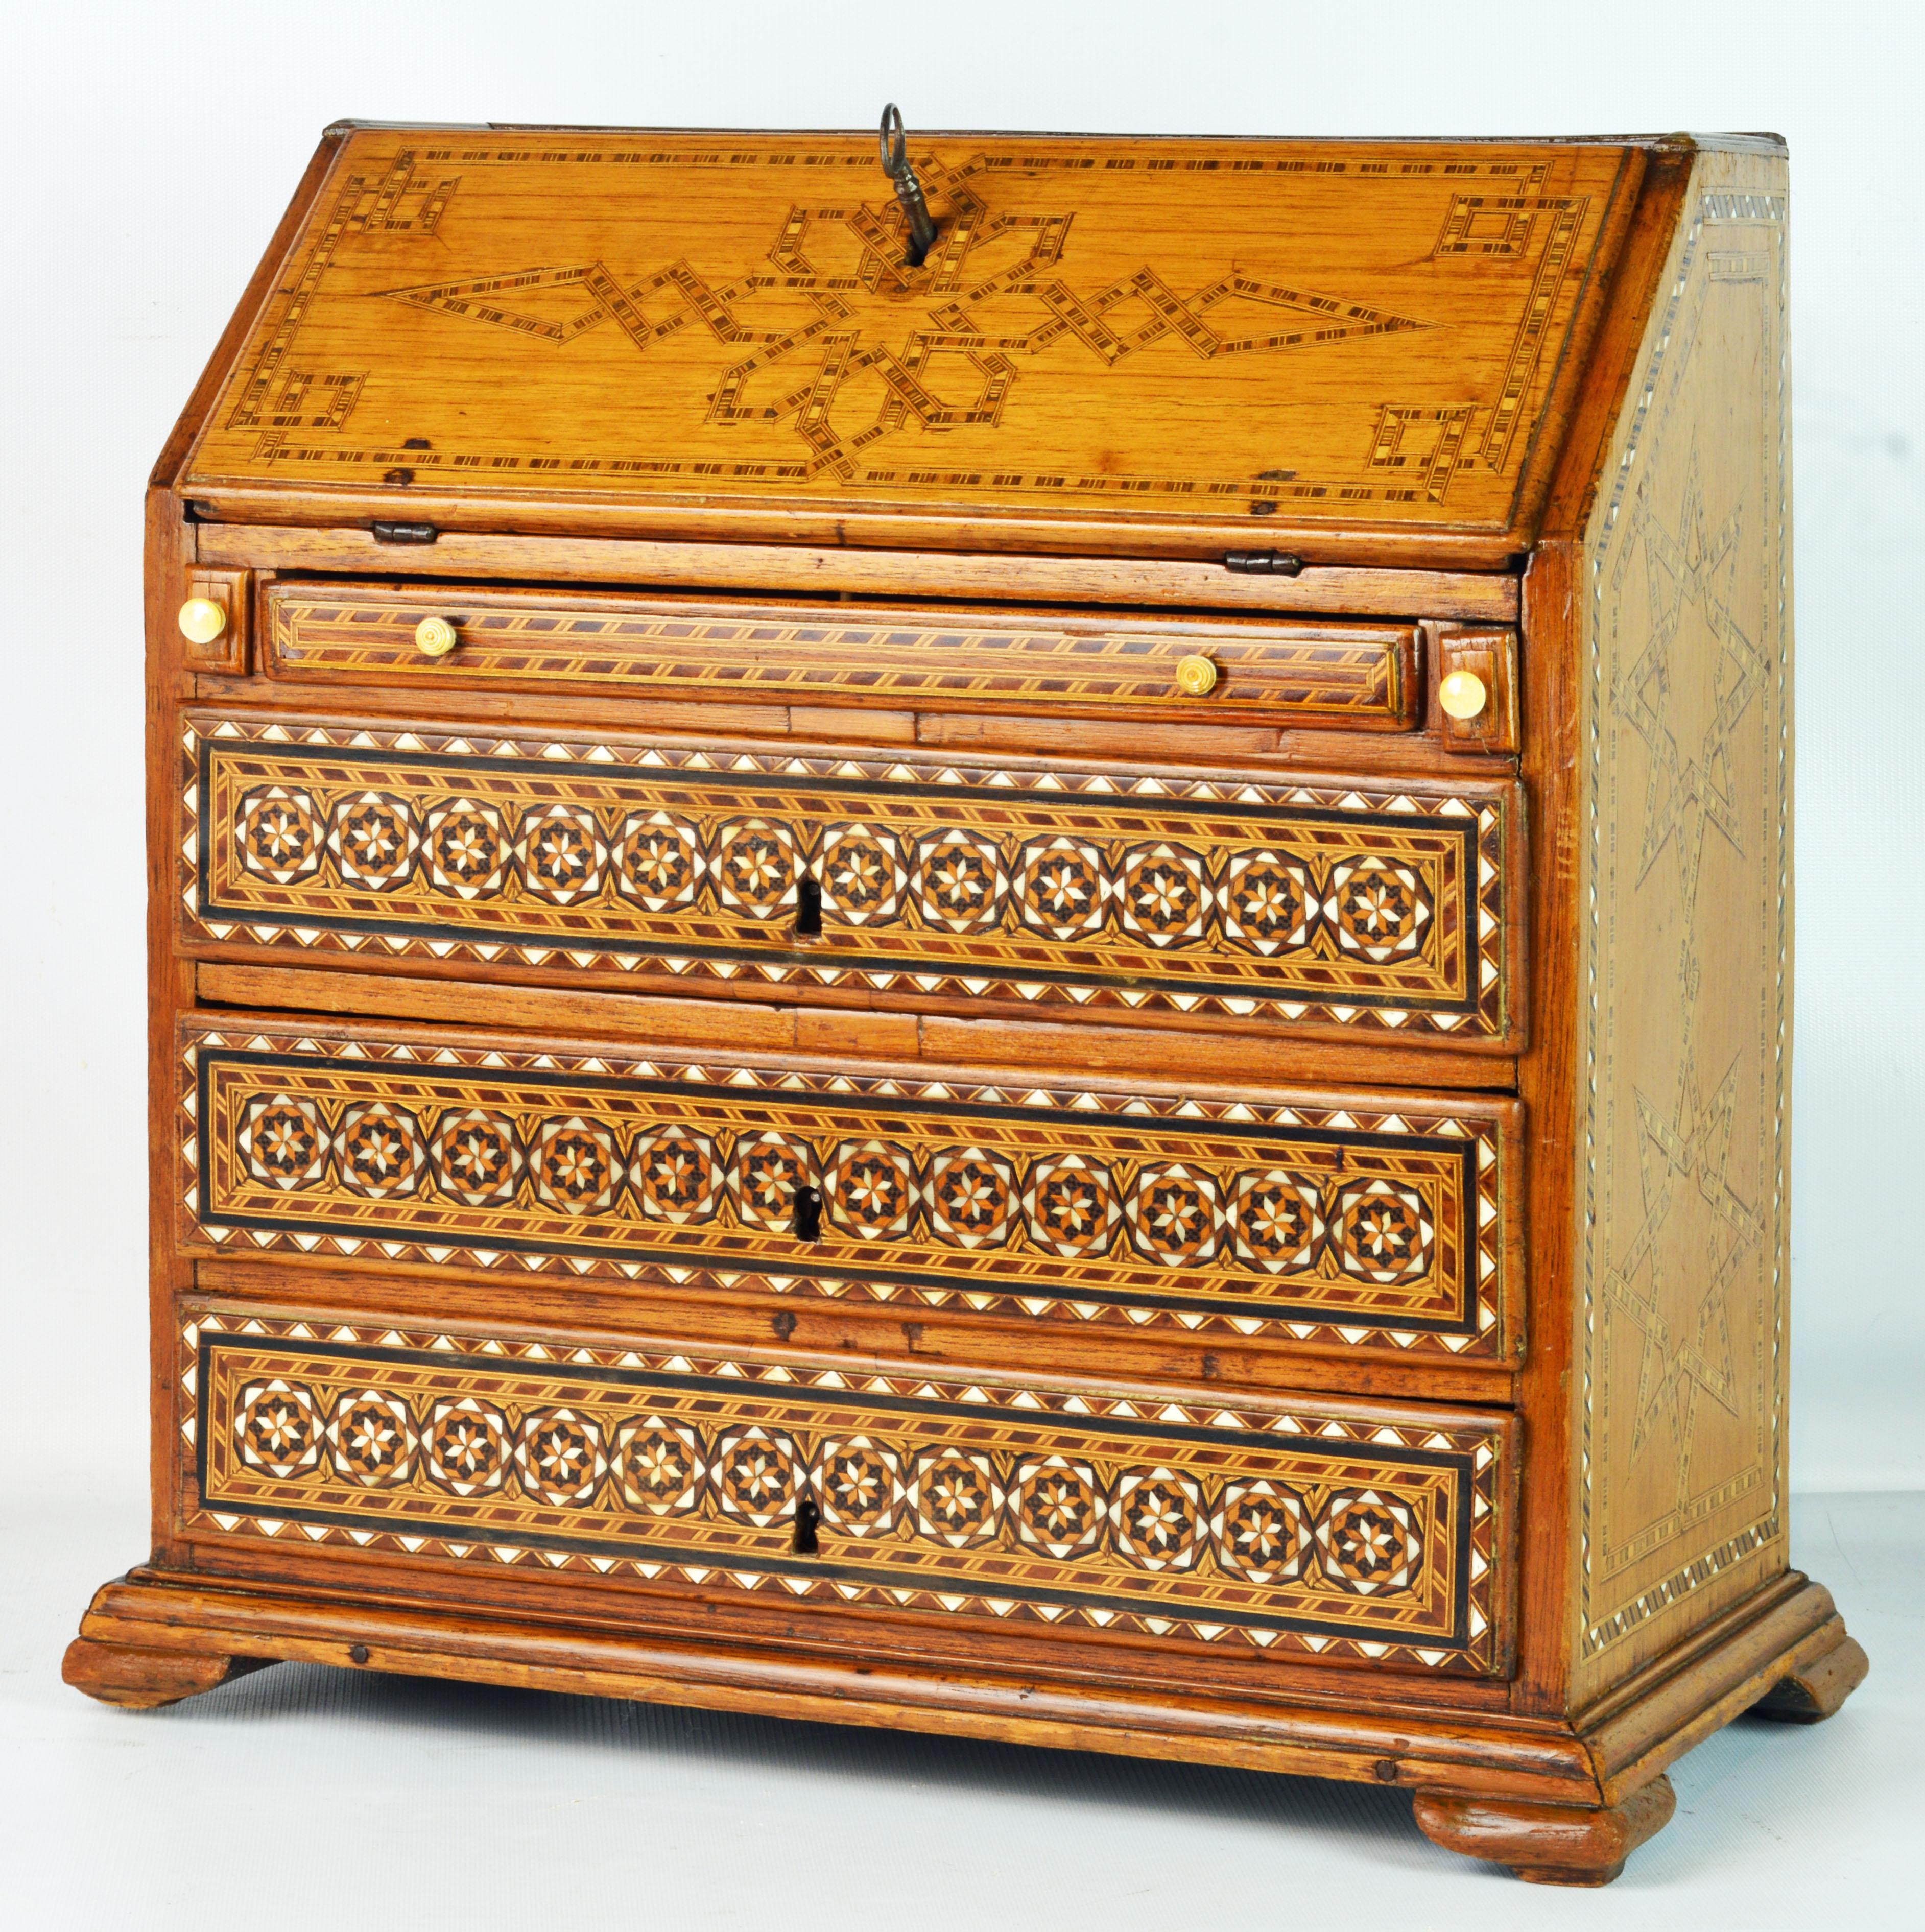 This rare and charming miniature slant front chest is created in the Georgian style with elaborate bone and veneer inlay as well as certain details in the oriental style. The chest features an inlaid slanted front opening up to an interior fitted